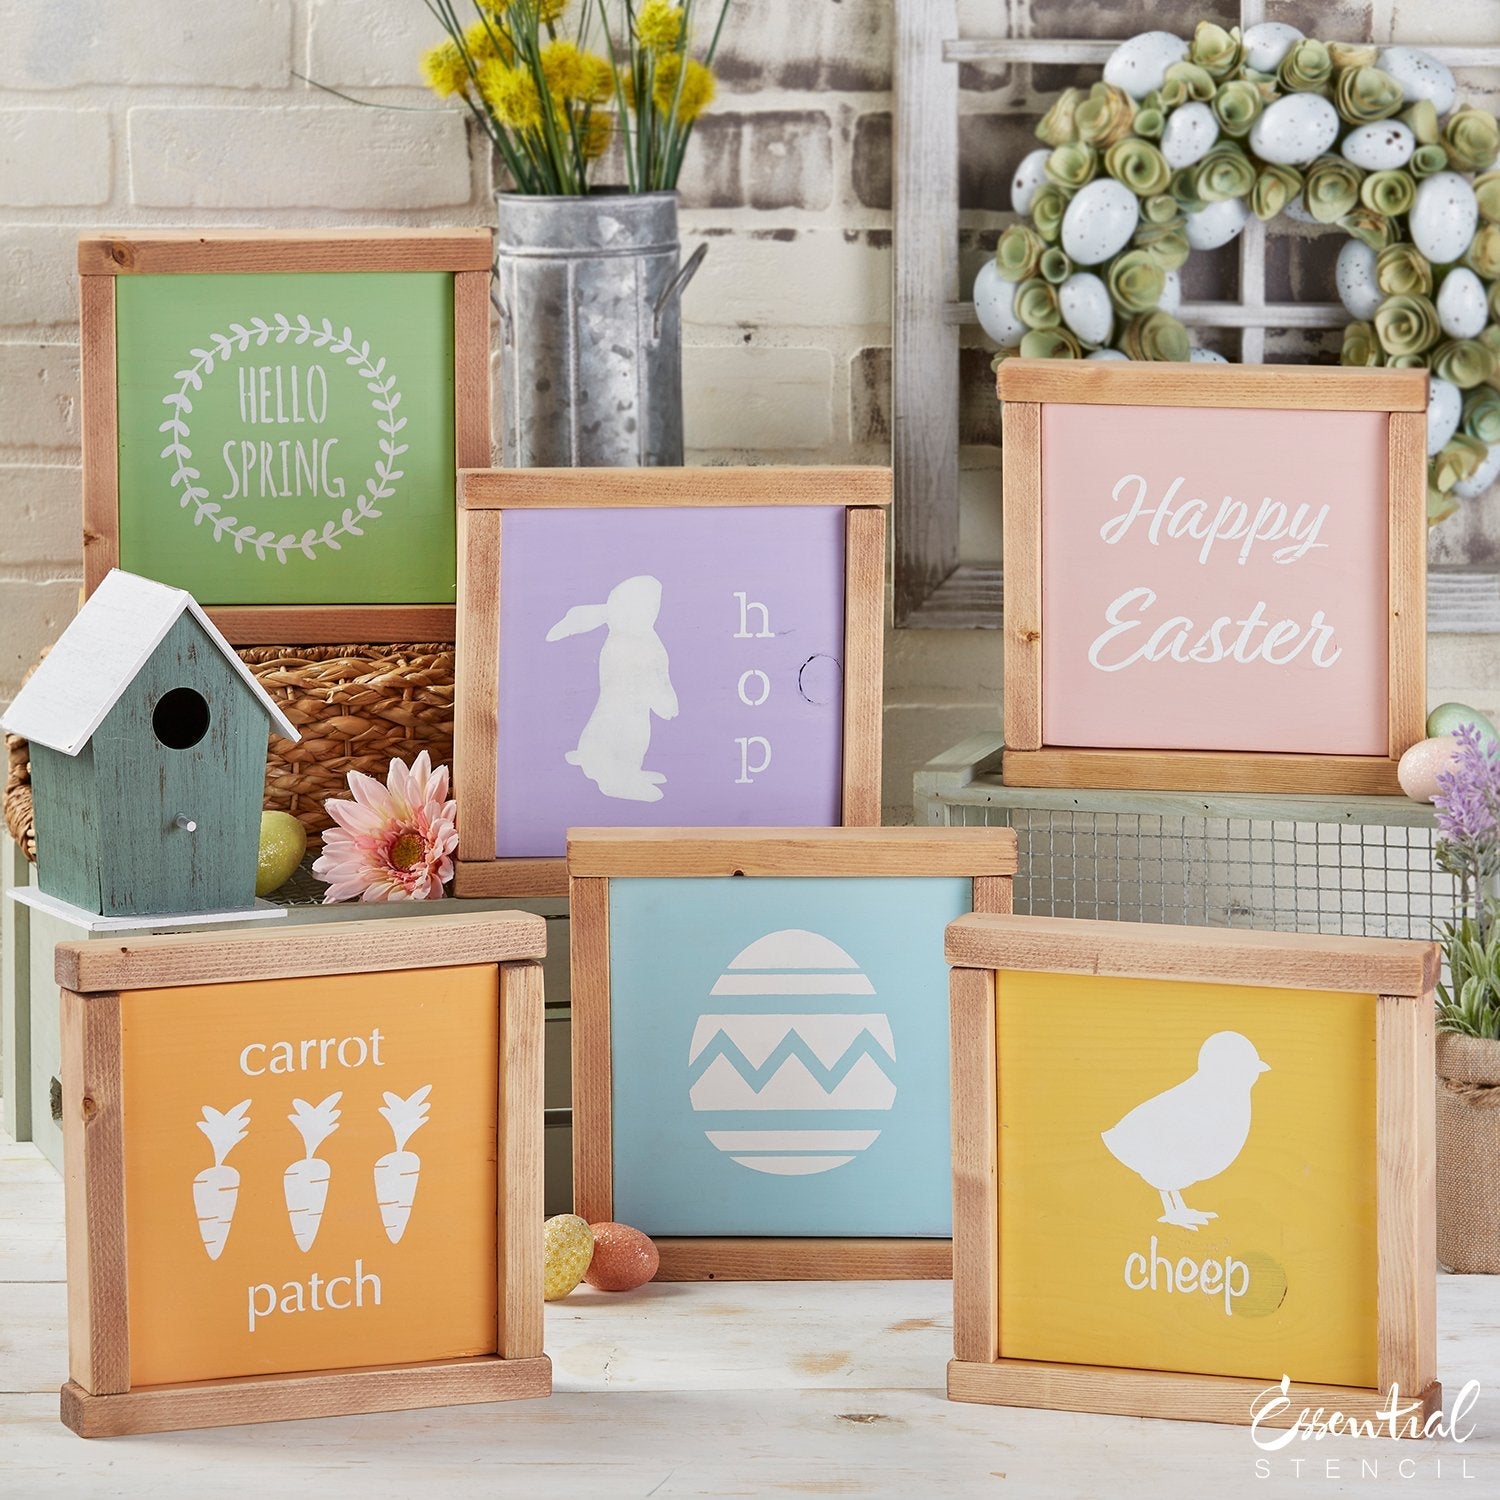 Reusable Spring and Easter Sign Stencils for painting wood signs | DIY Farmhouse Easter Decor | Hello Spring stencil, Carrot patch Stencil, easter egg stencil, Happy Easter stencil, Chick silhouette Cheep stencil, bunny hop silhouette stencil, bloom flowers stencil